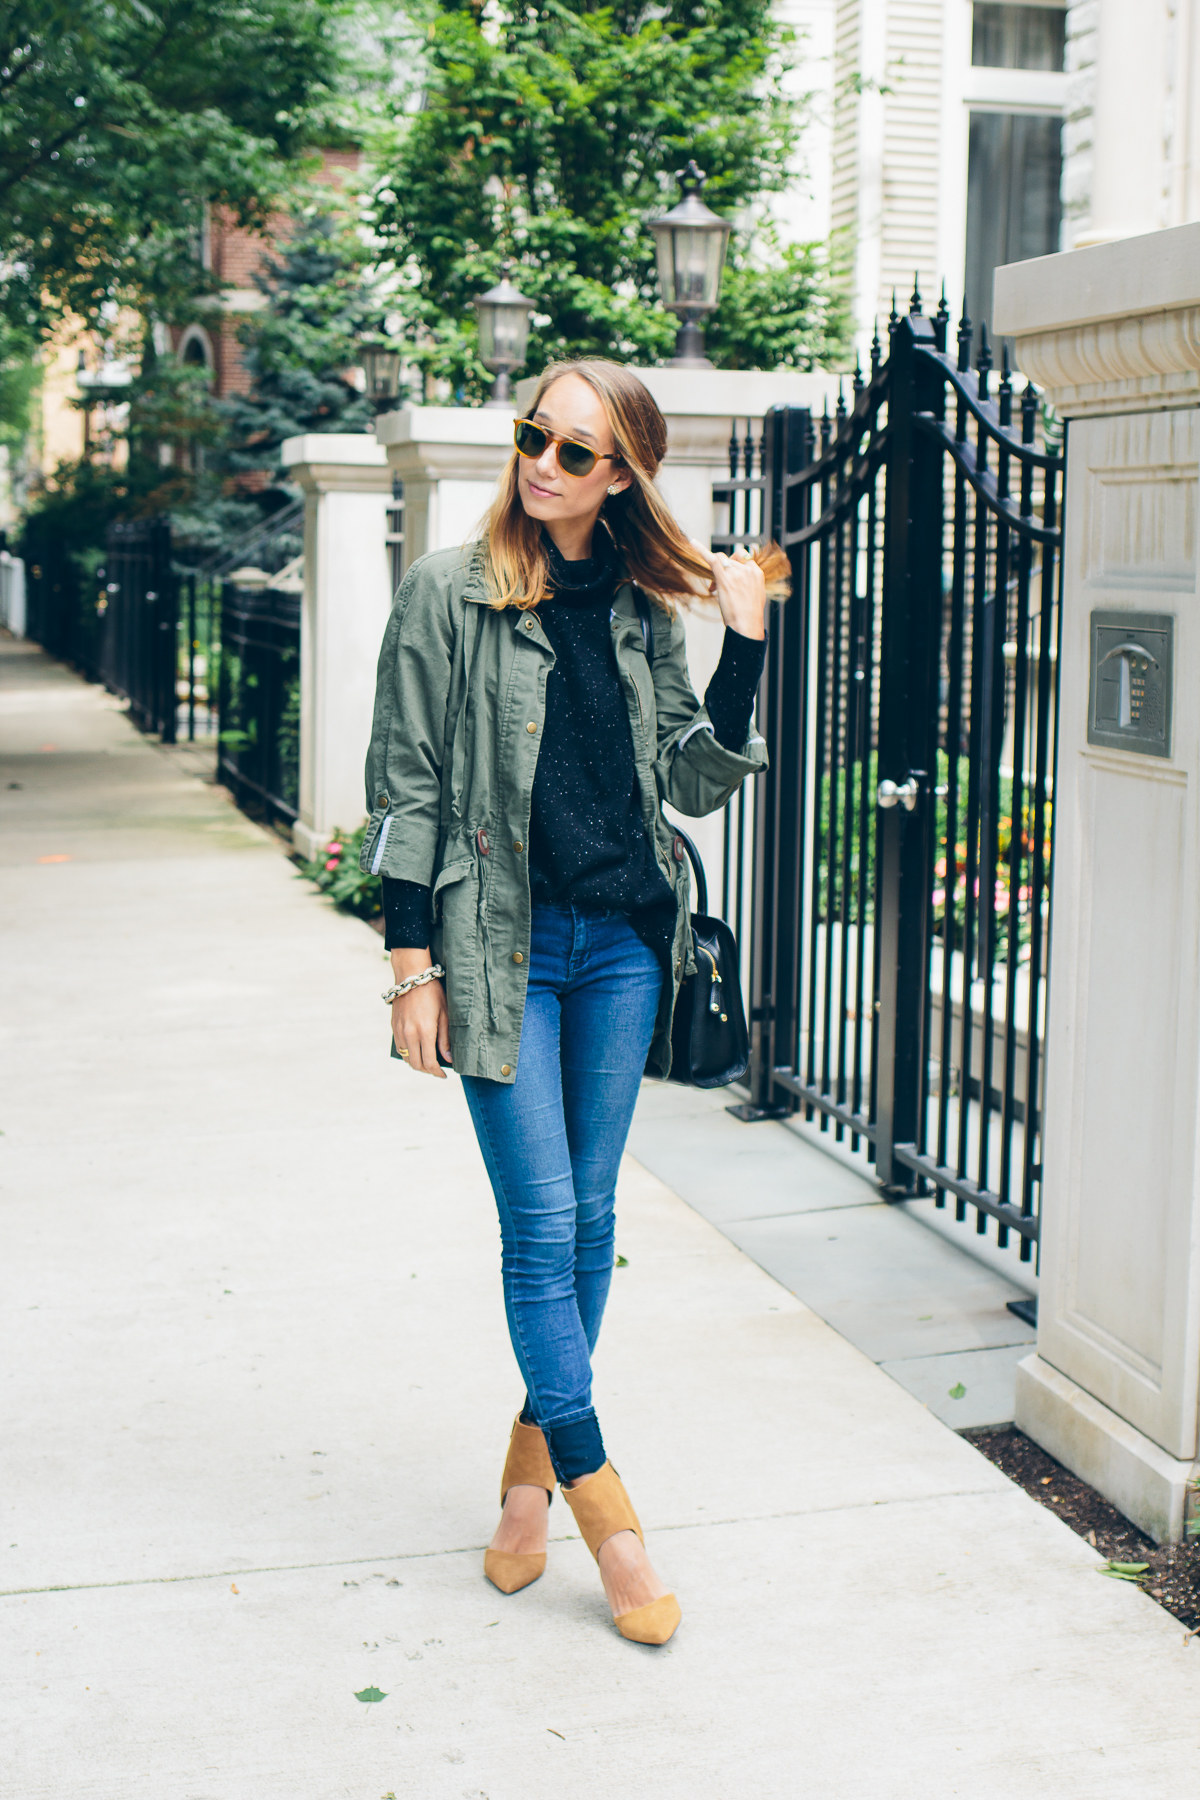 cashmere sweater, skinny jeans, military jacket and heels — via @TheFoxandShe